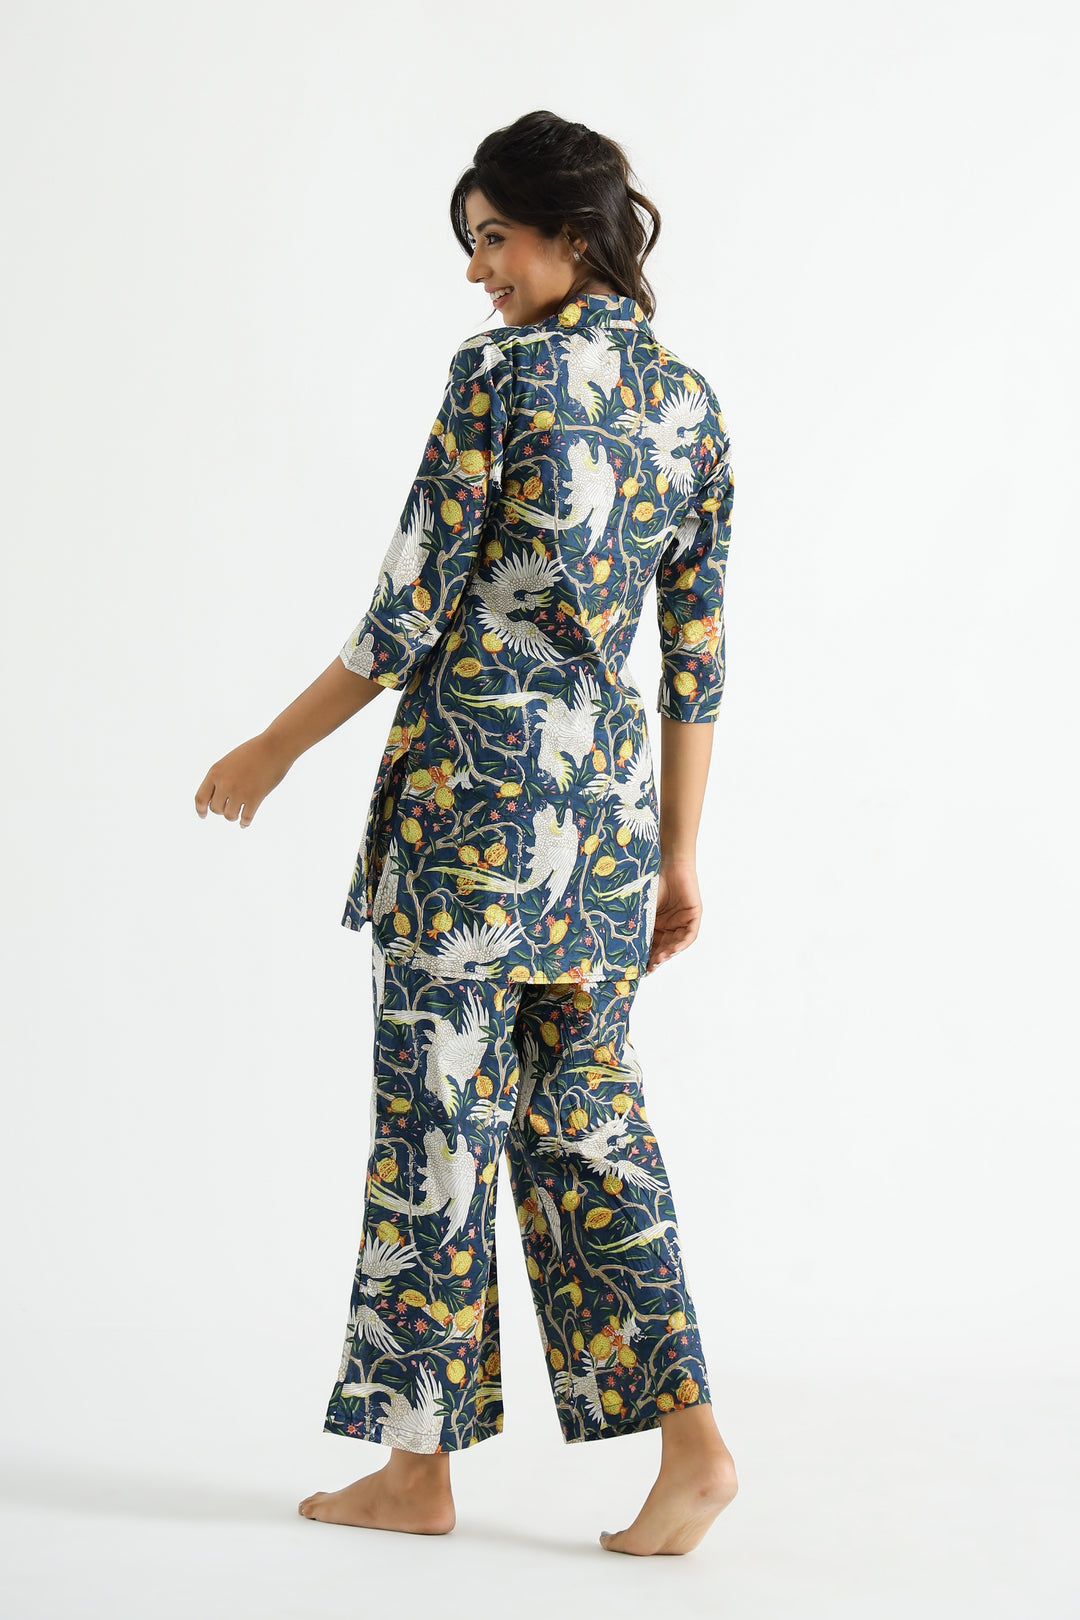 Blue bird Collared Cotton Lounge Co-Ord Set with 3 button